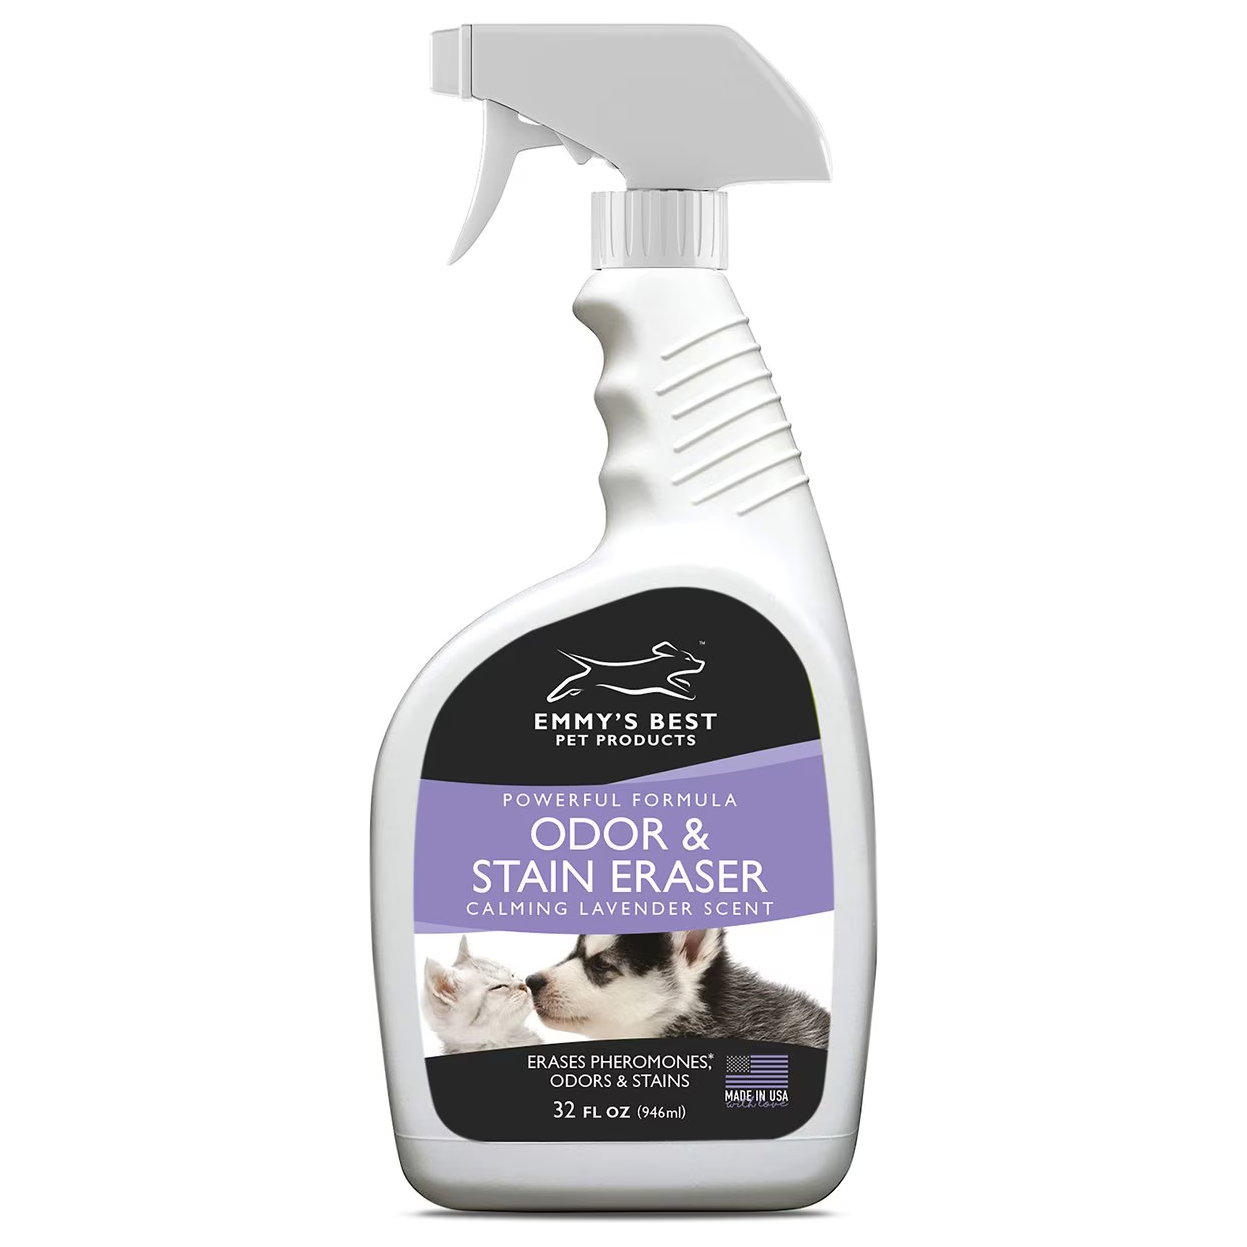 Emmy's Best Pet Products Enzyme-Based Pet Odor & Stain Eraser